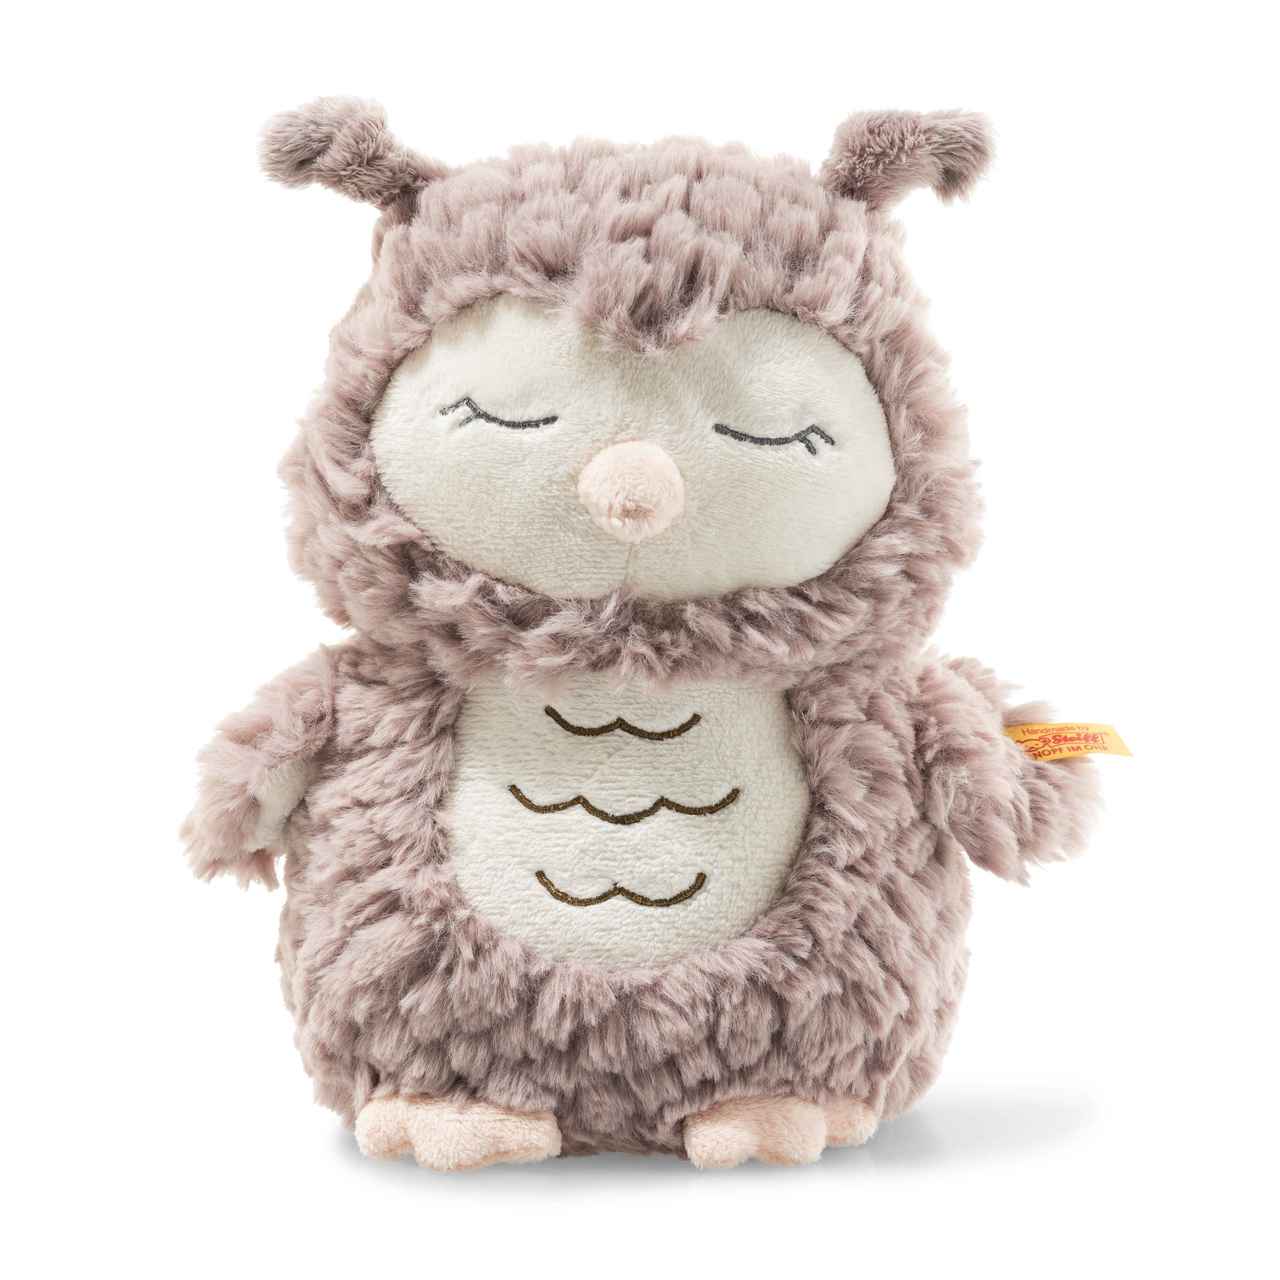 Steiff - Ollie Owl Baby Toy, 9 Inches